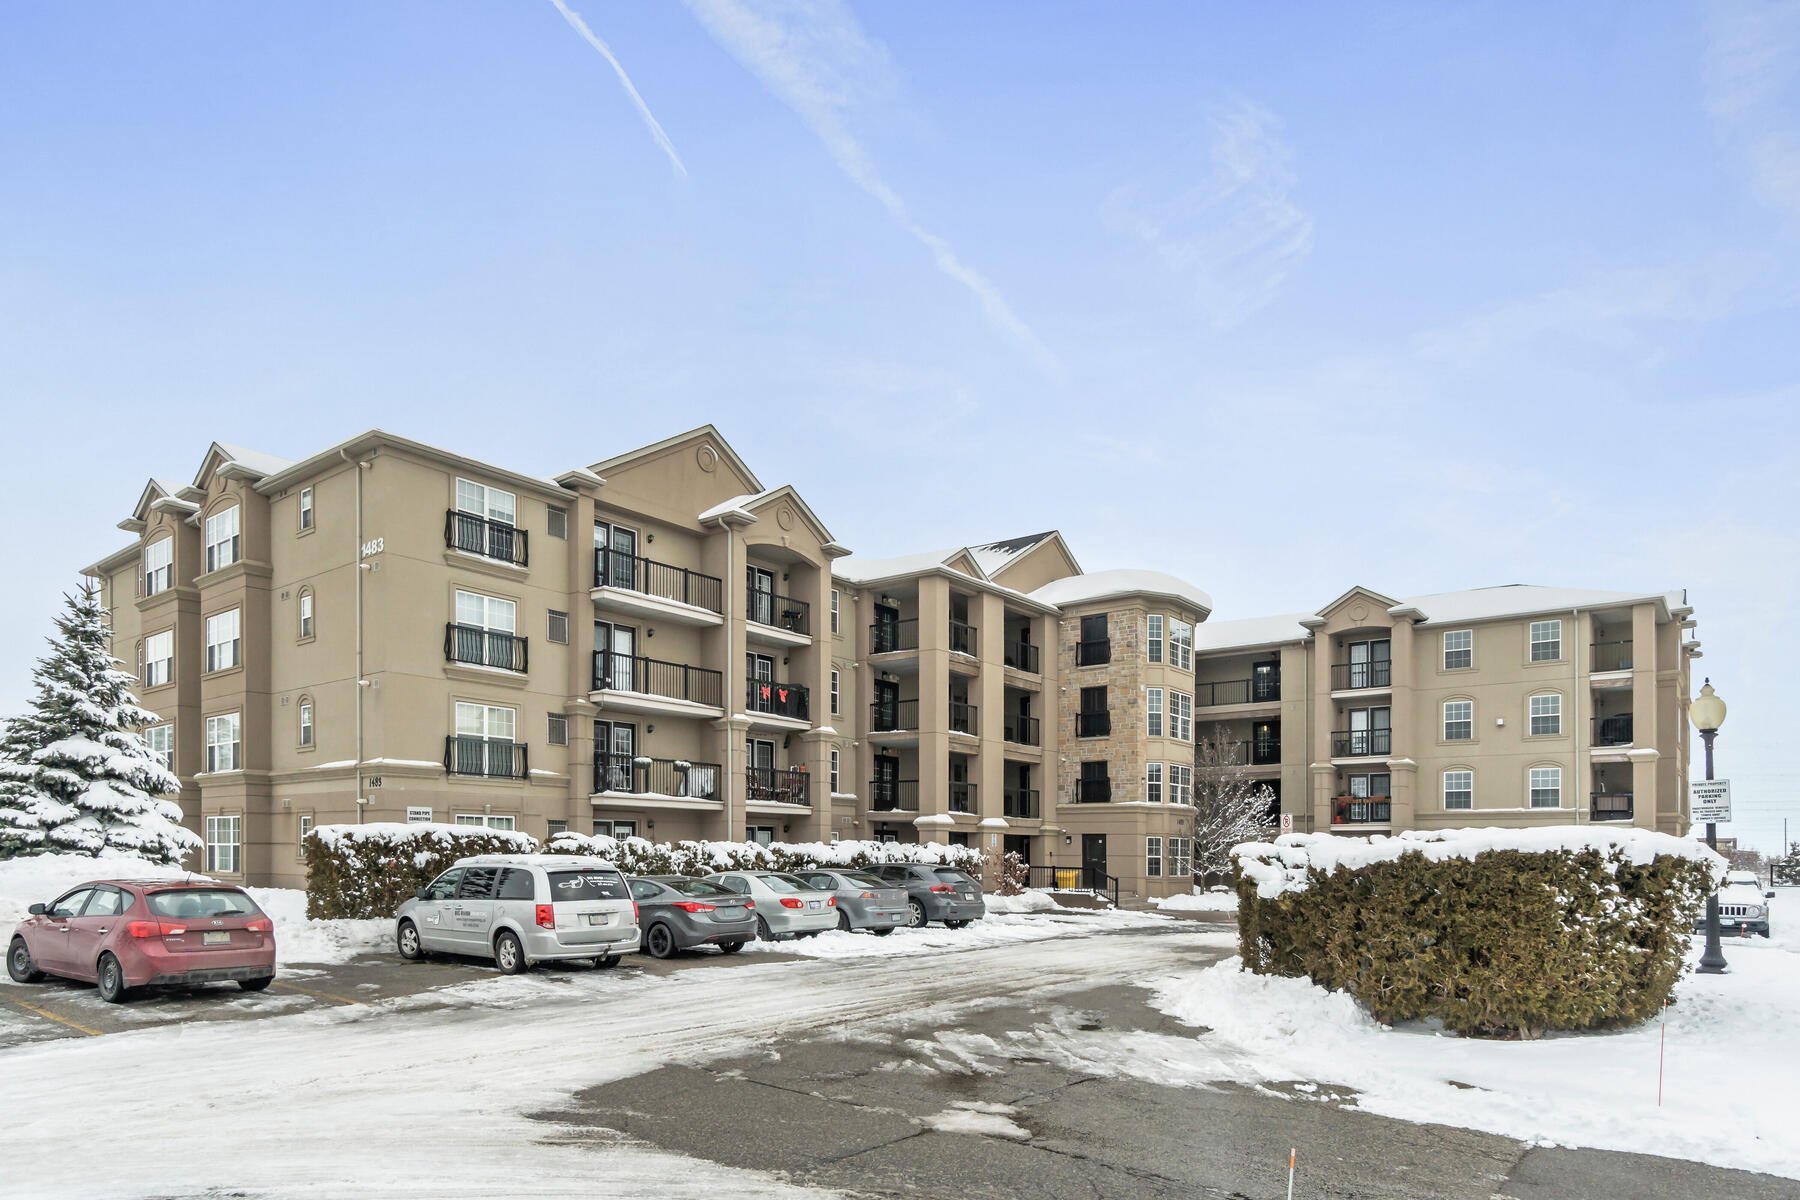 Unit 309 1483 Maple Ave Milton ON L9T 0B6 Canada-008-037-Exterior  Front-MLS_Size.jpg